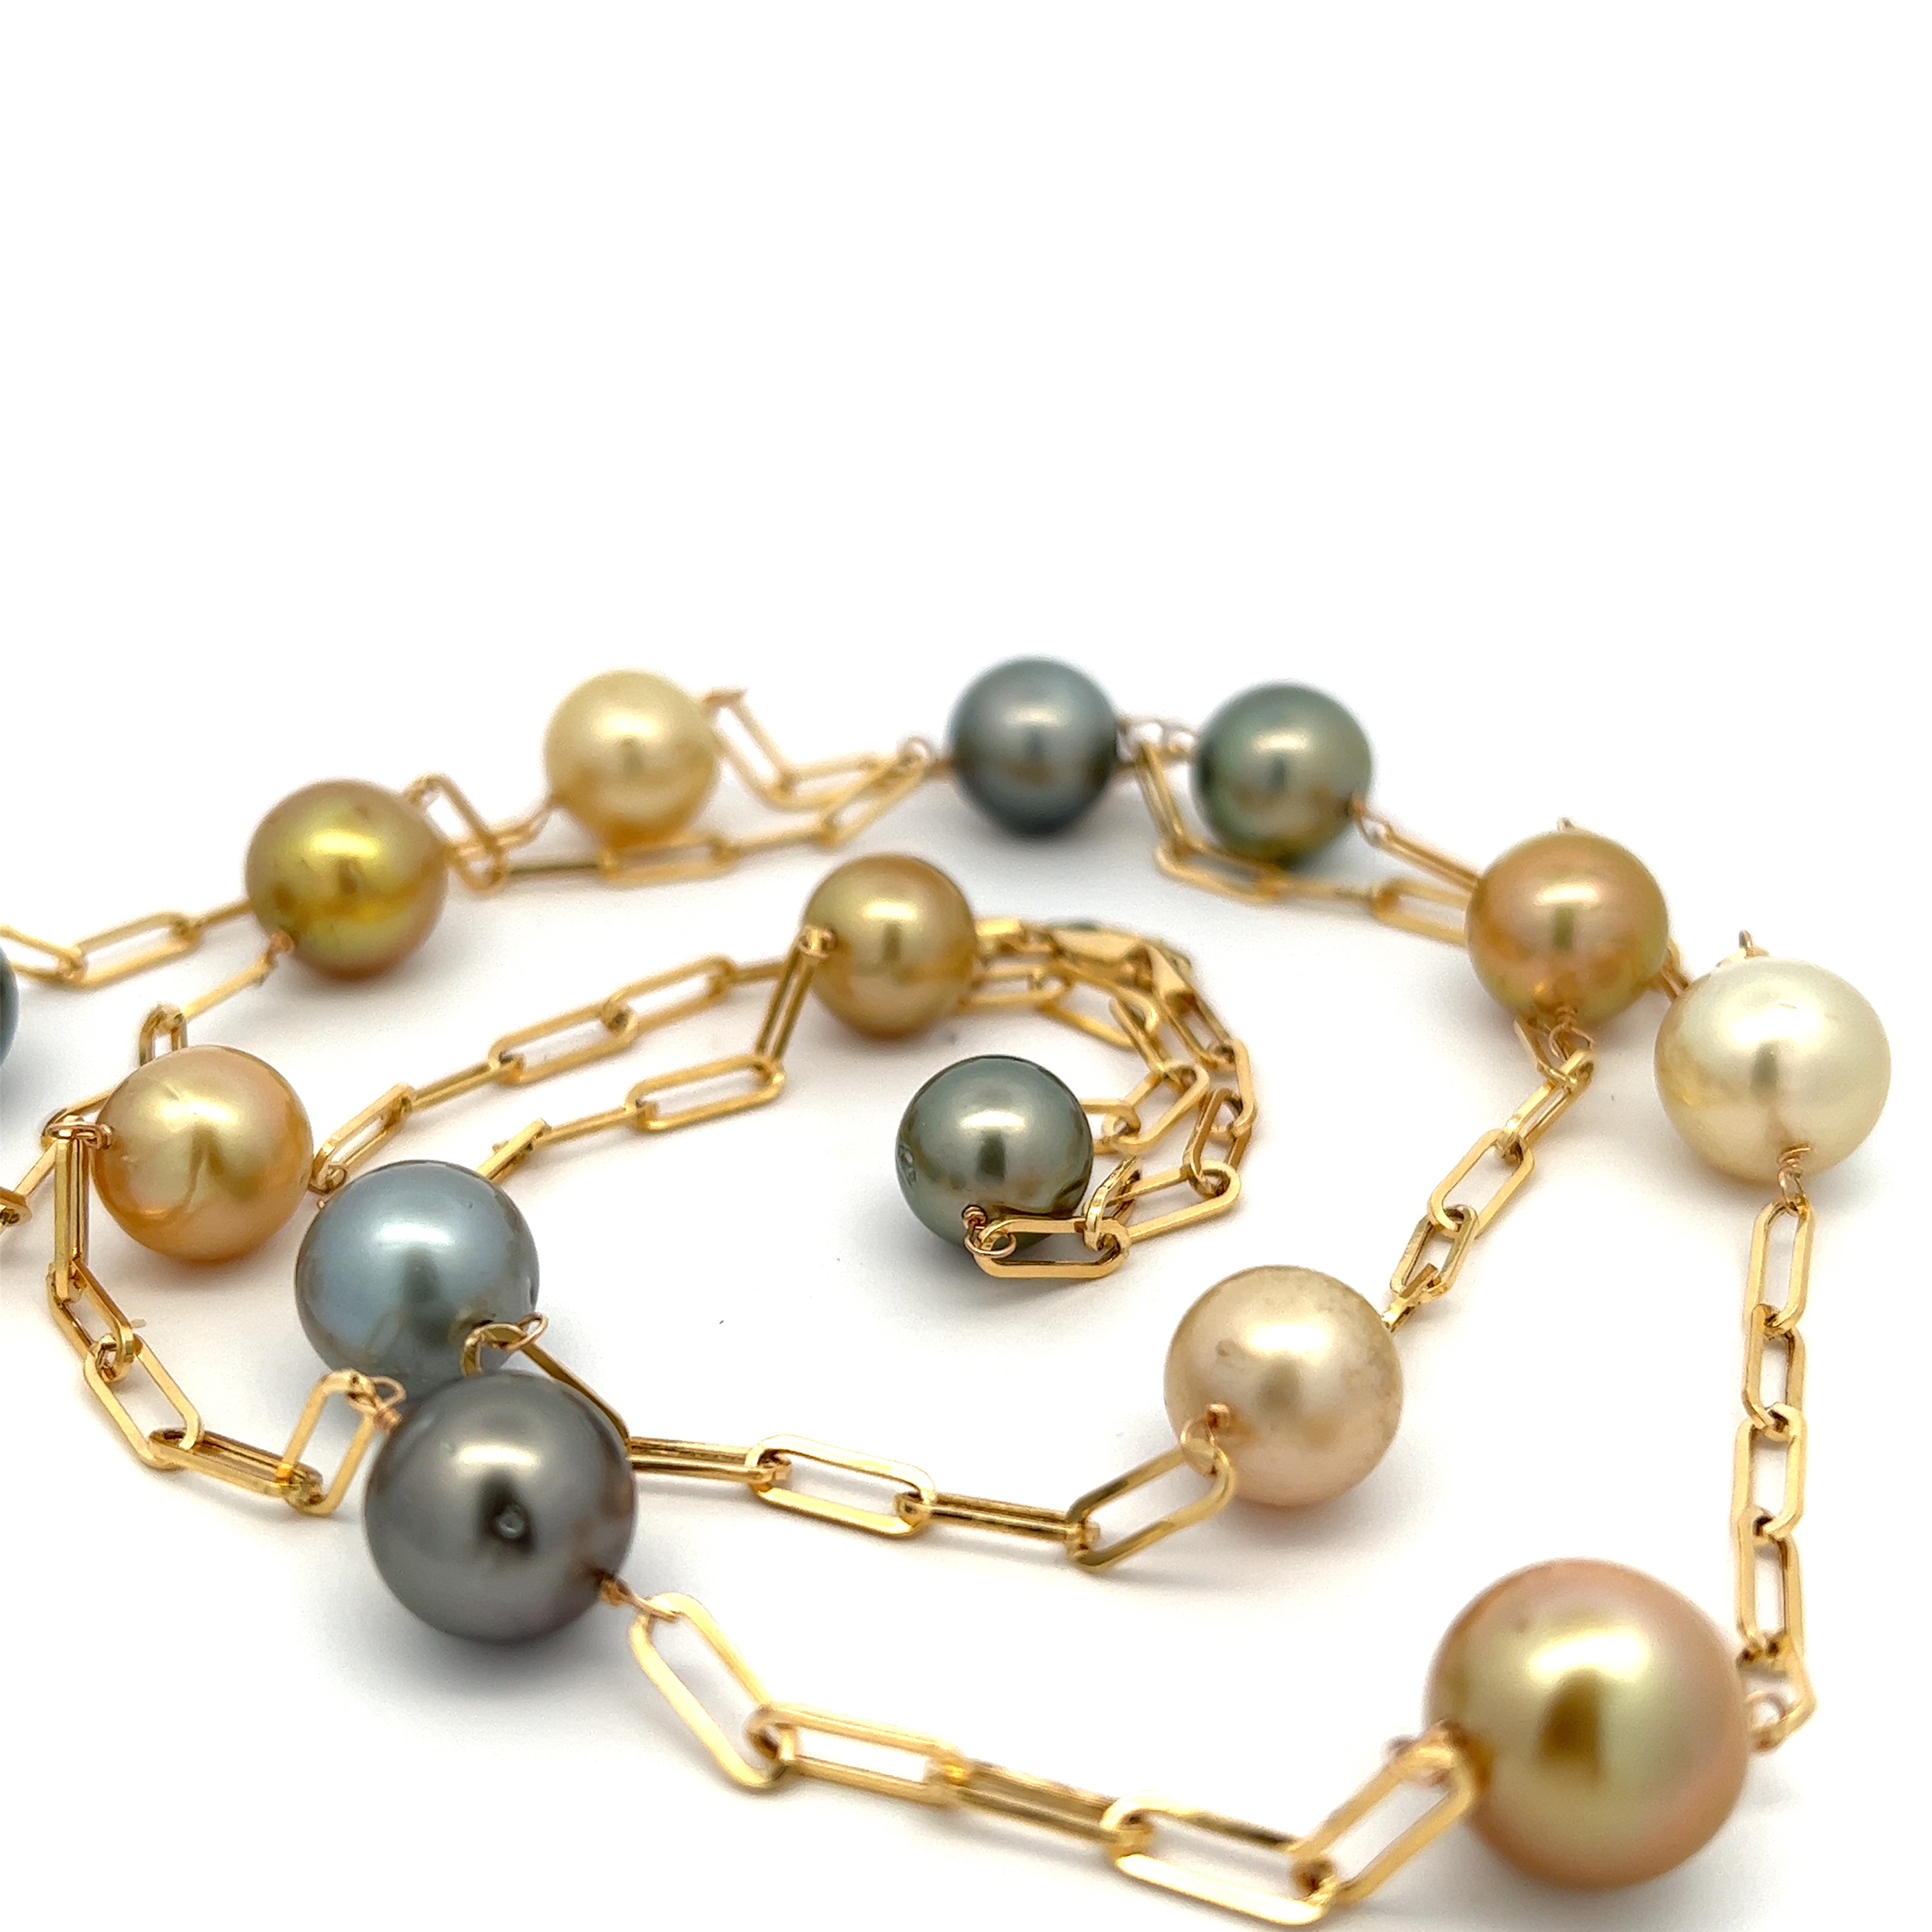 14 Karat yellow gold paperclip necklace with 6=11.00-13.00mm Tahitian Pearls and 9=11.00-13.00mm South Sea Pearls. Length 36"